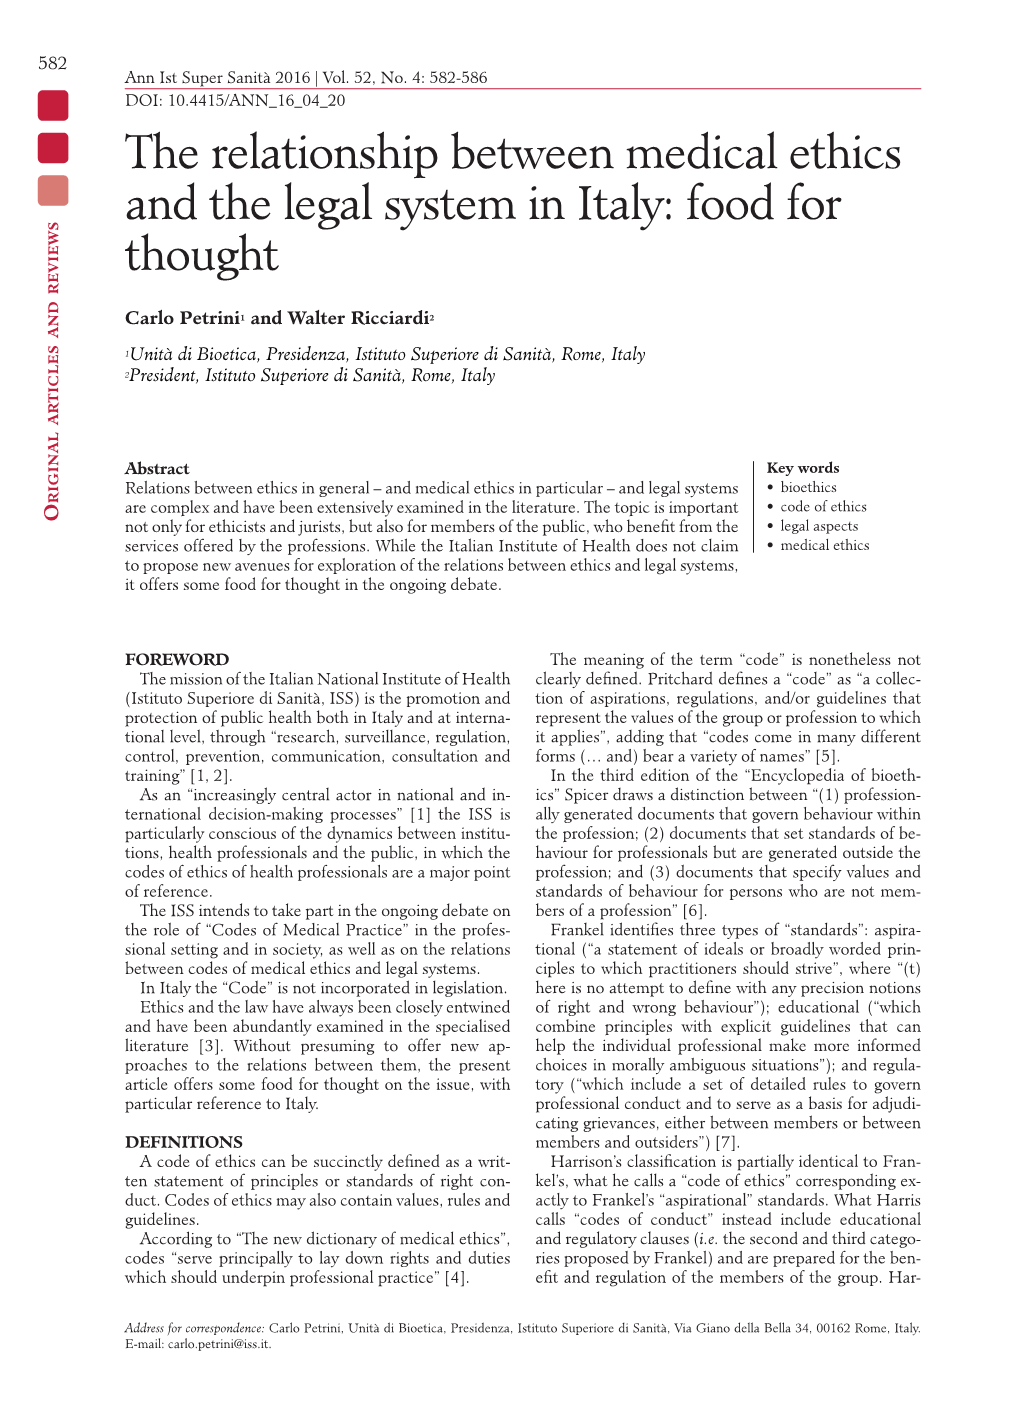 The Relationship Between Medical Ethics and the Legal System in Italy